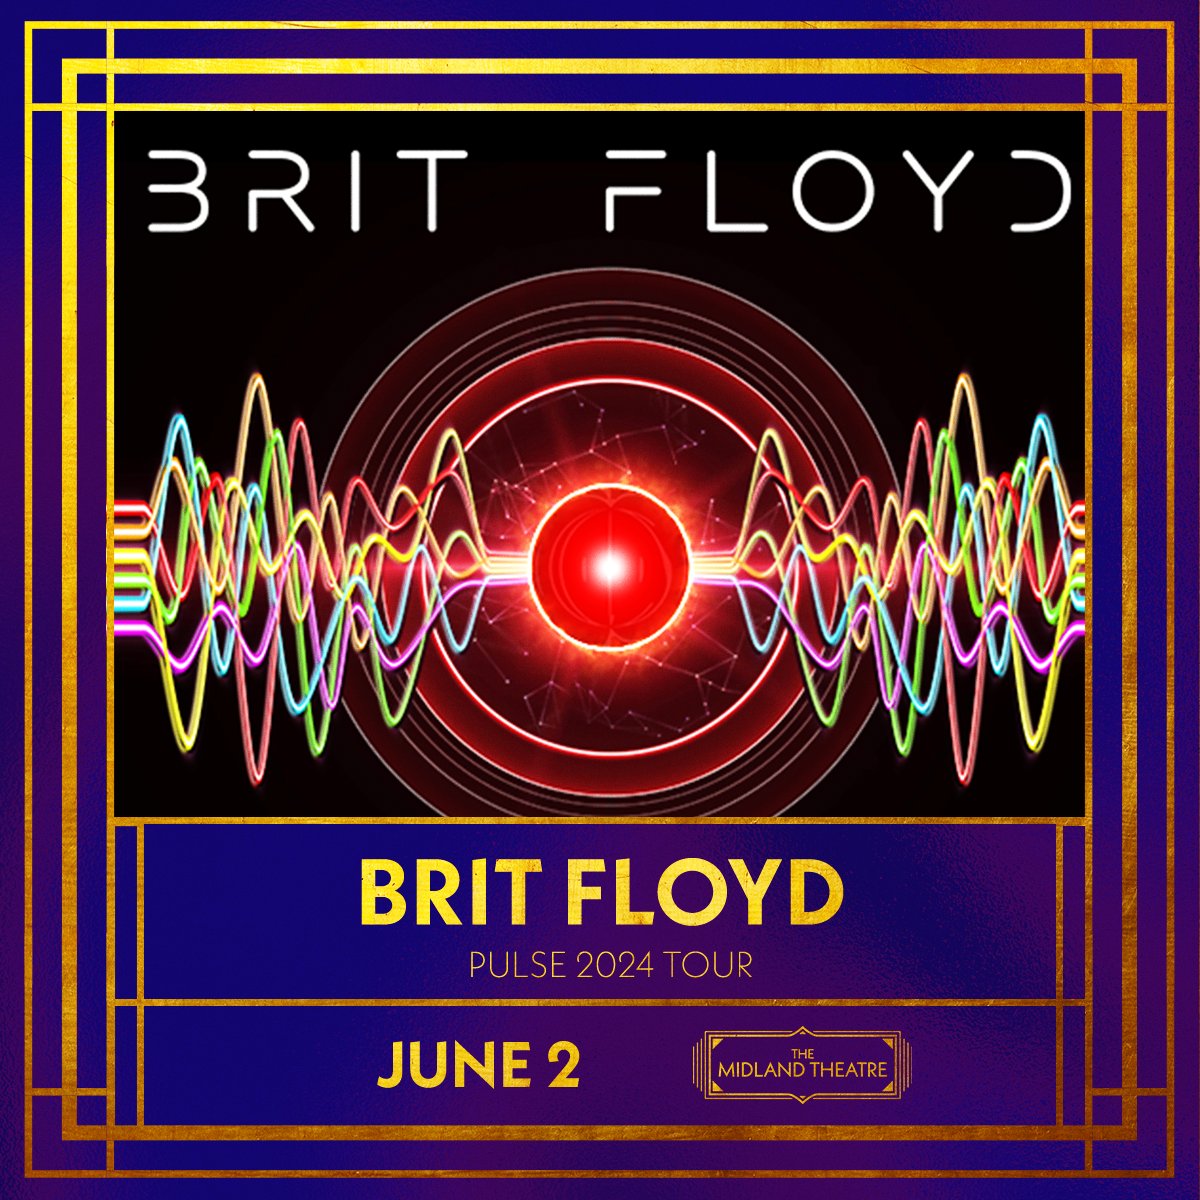 JUST ANNOUNCED @britfloyd comes back to The Midland Theatre June 2. Tickets on sale this Friday at 10 a.m.!